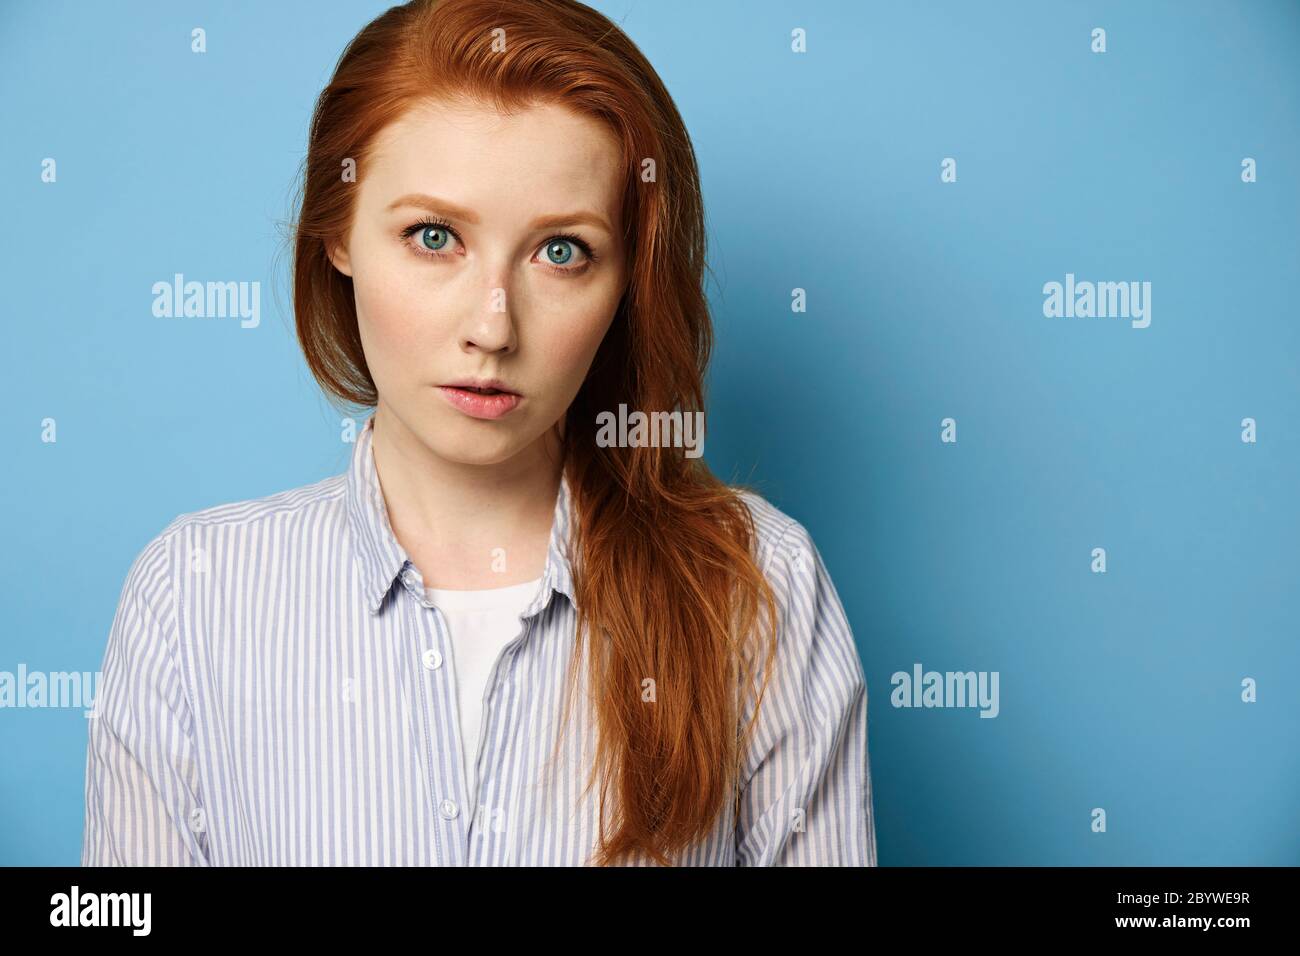 Red-haired girl with blue eyes in a striped shirt stands on a blue background and looks in the frame. Stock Photo